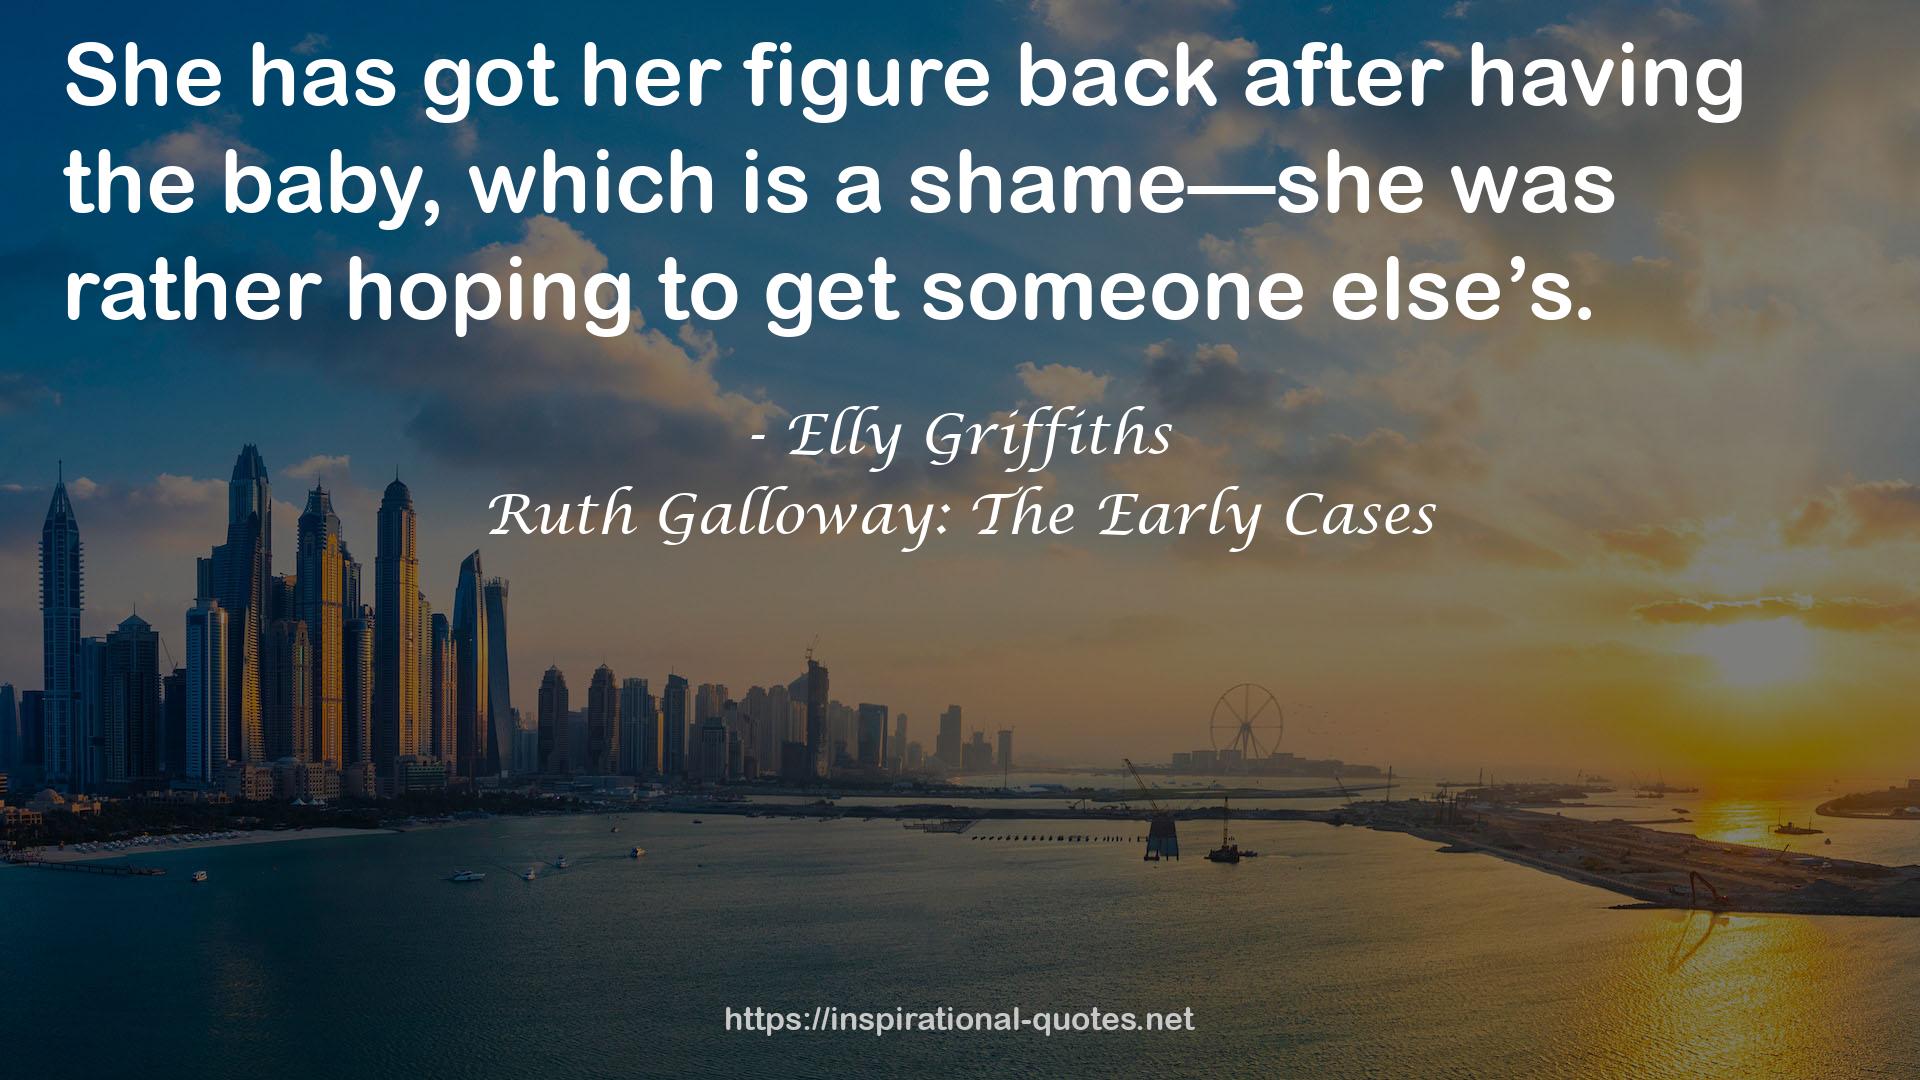 Ruth Galloway: The Early Cases QUOTES